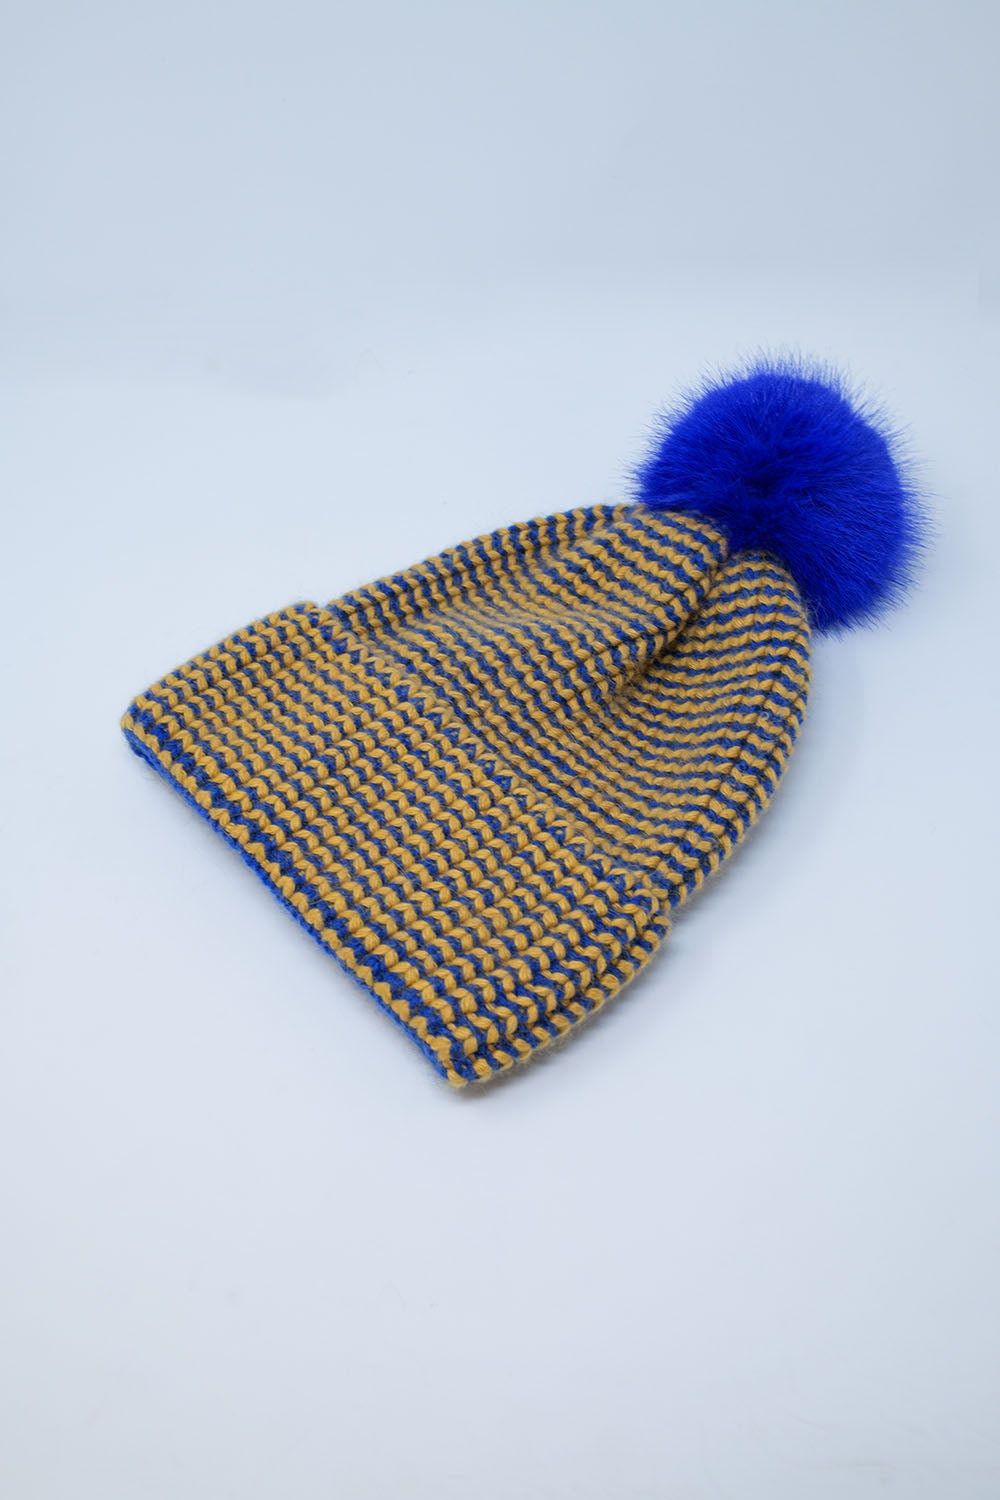 Knitted Beanie With Pom Pom in Blue and Yellow - Szua Store